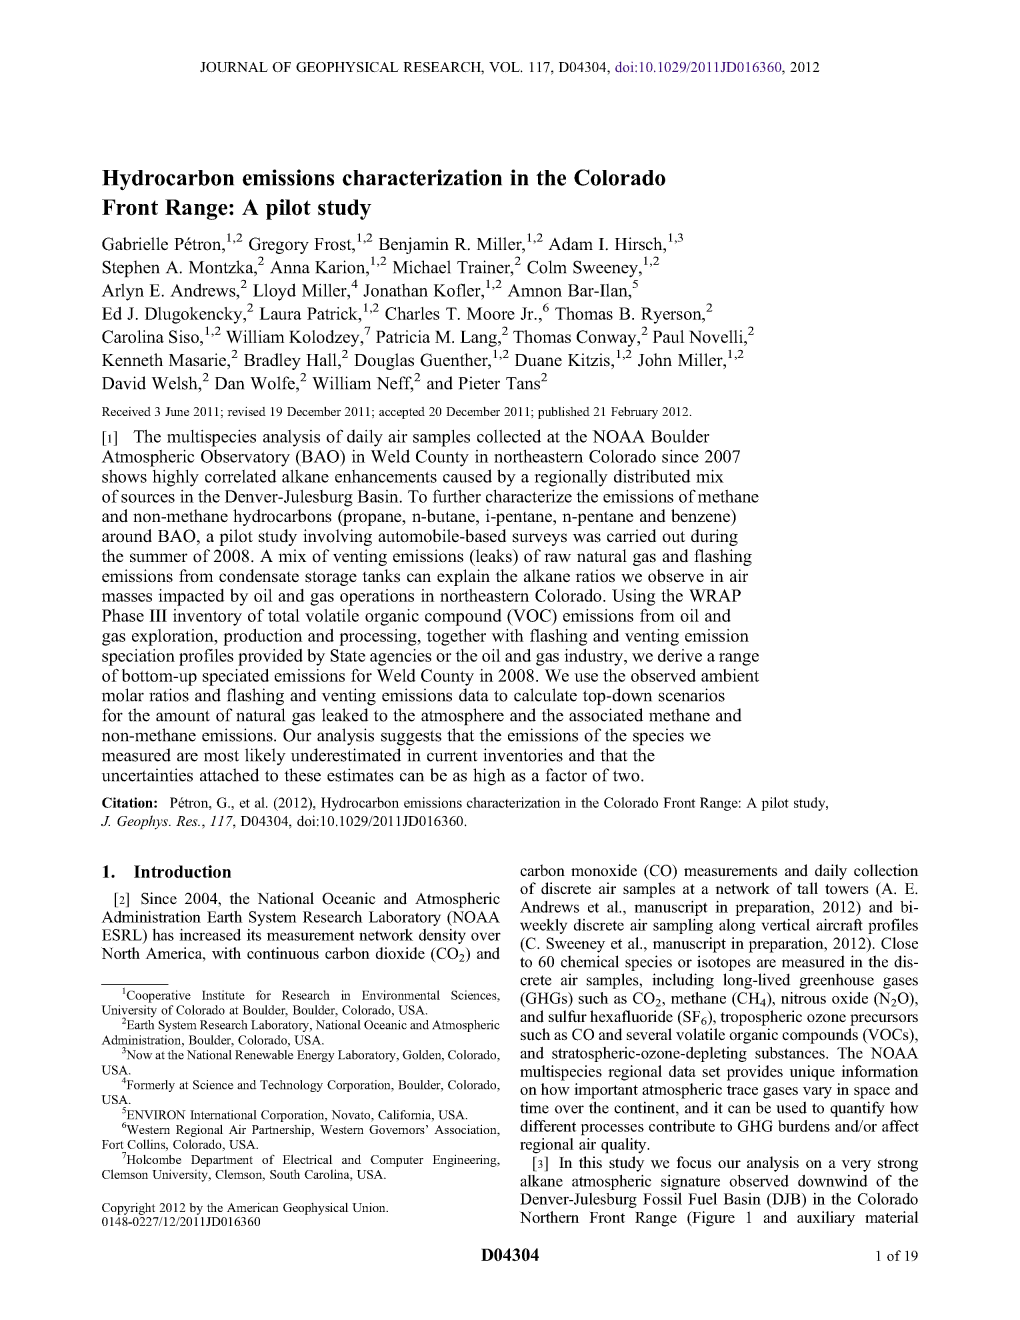 Hydrocarbon Emissions Characterization in the Colorado Front Range: a Pilot Study